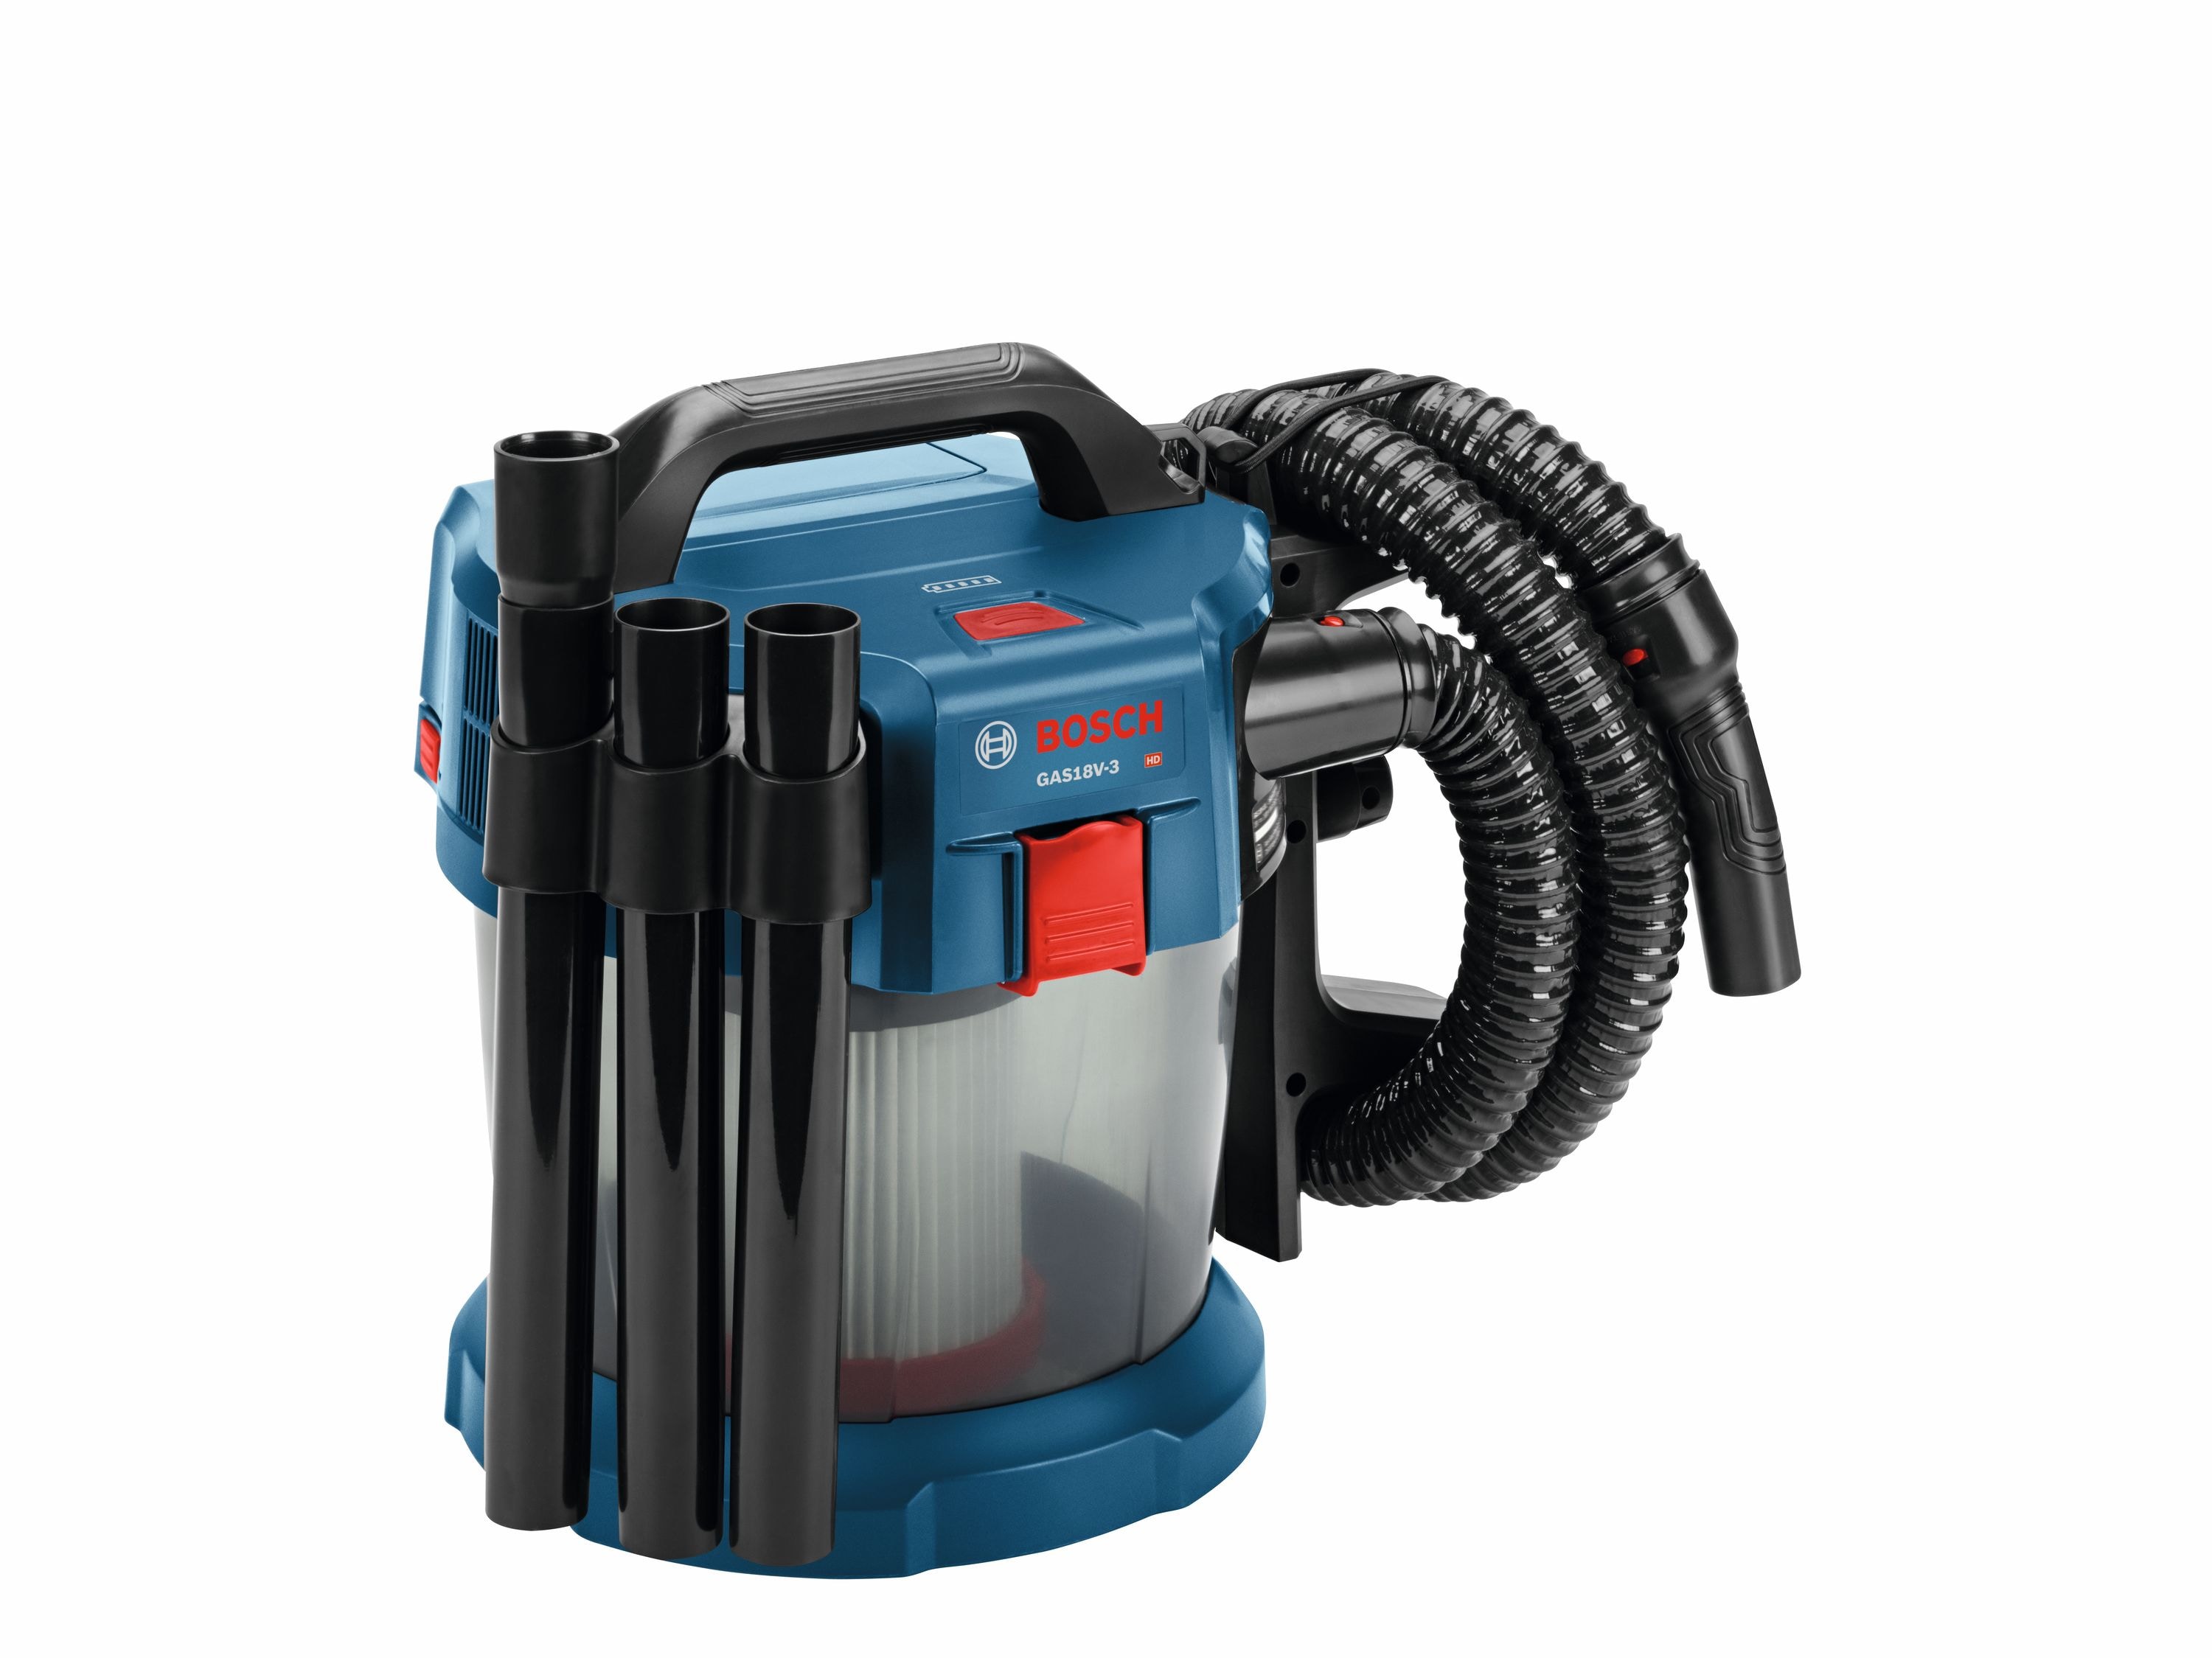 Bosch 2.6- Gallons 73.49-HP Wet/Dry Shop (Bare Tool) in the Shop Vacuums Lowes.com